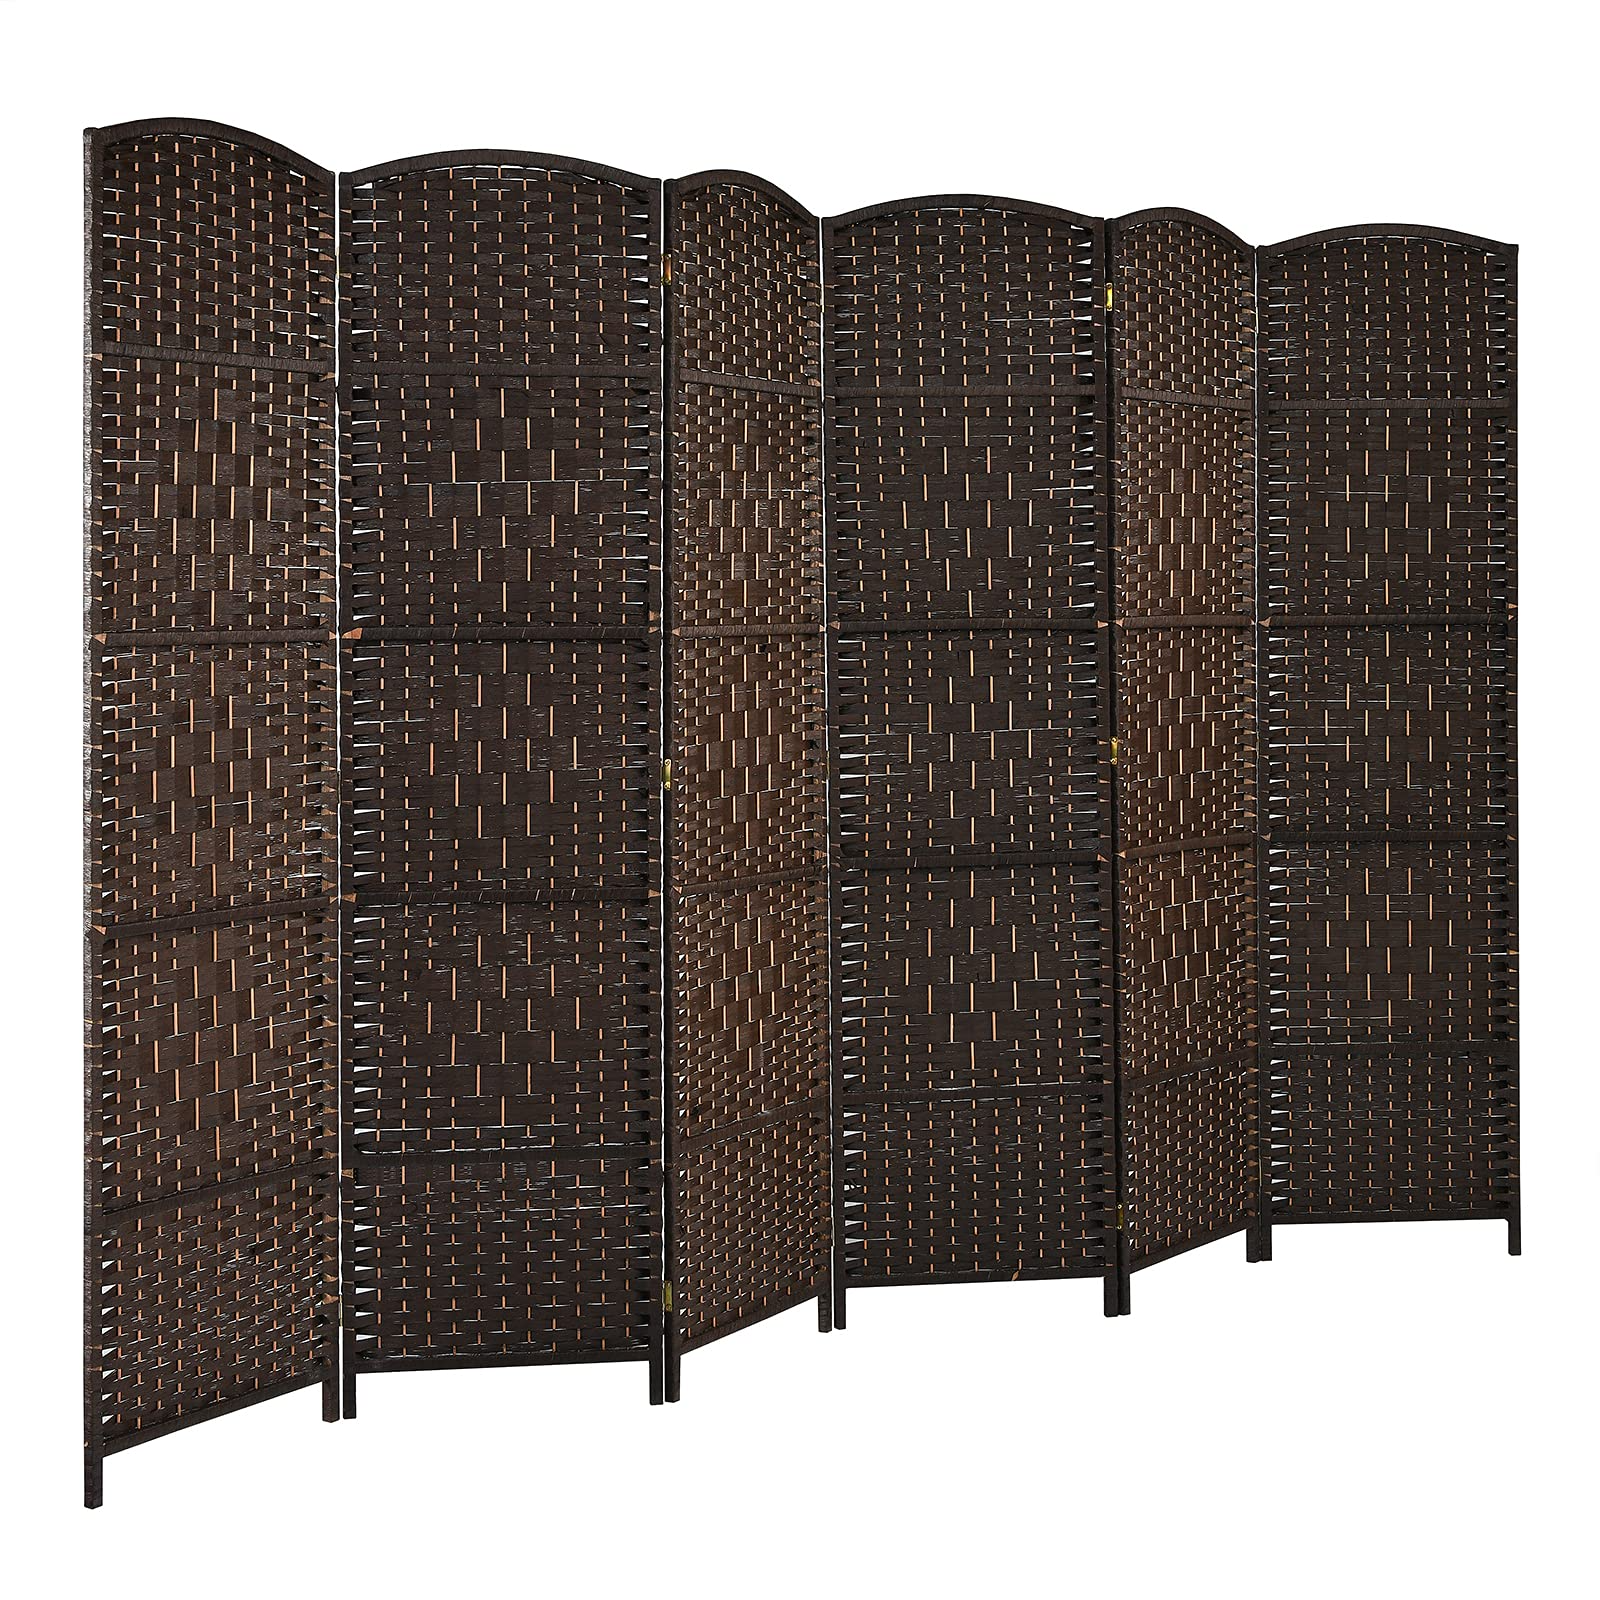 Giantex 6 Panel 6 Ft Tall Room Divider, Freestanding Wood Partition Room Dividers (Black/Brown) - Giantexus